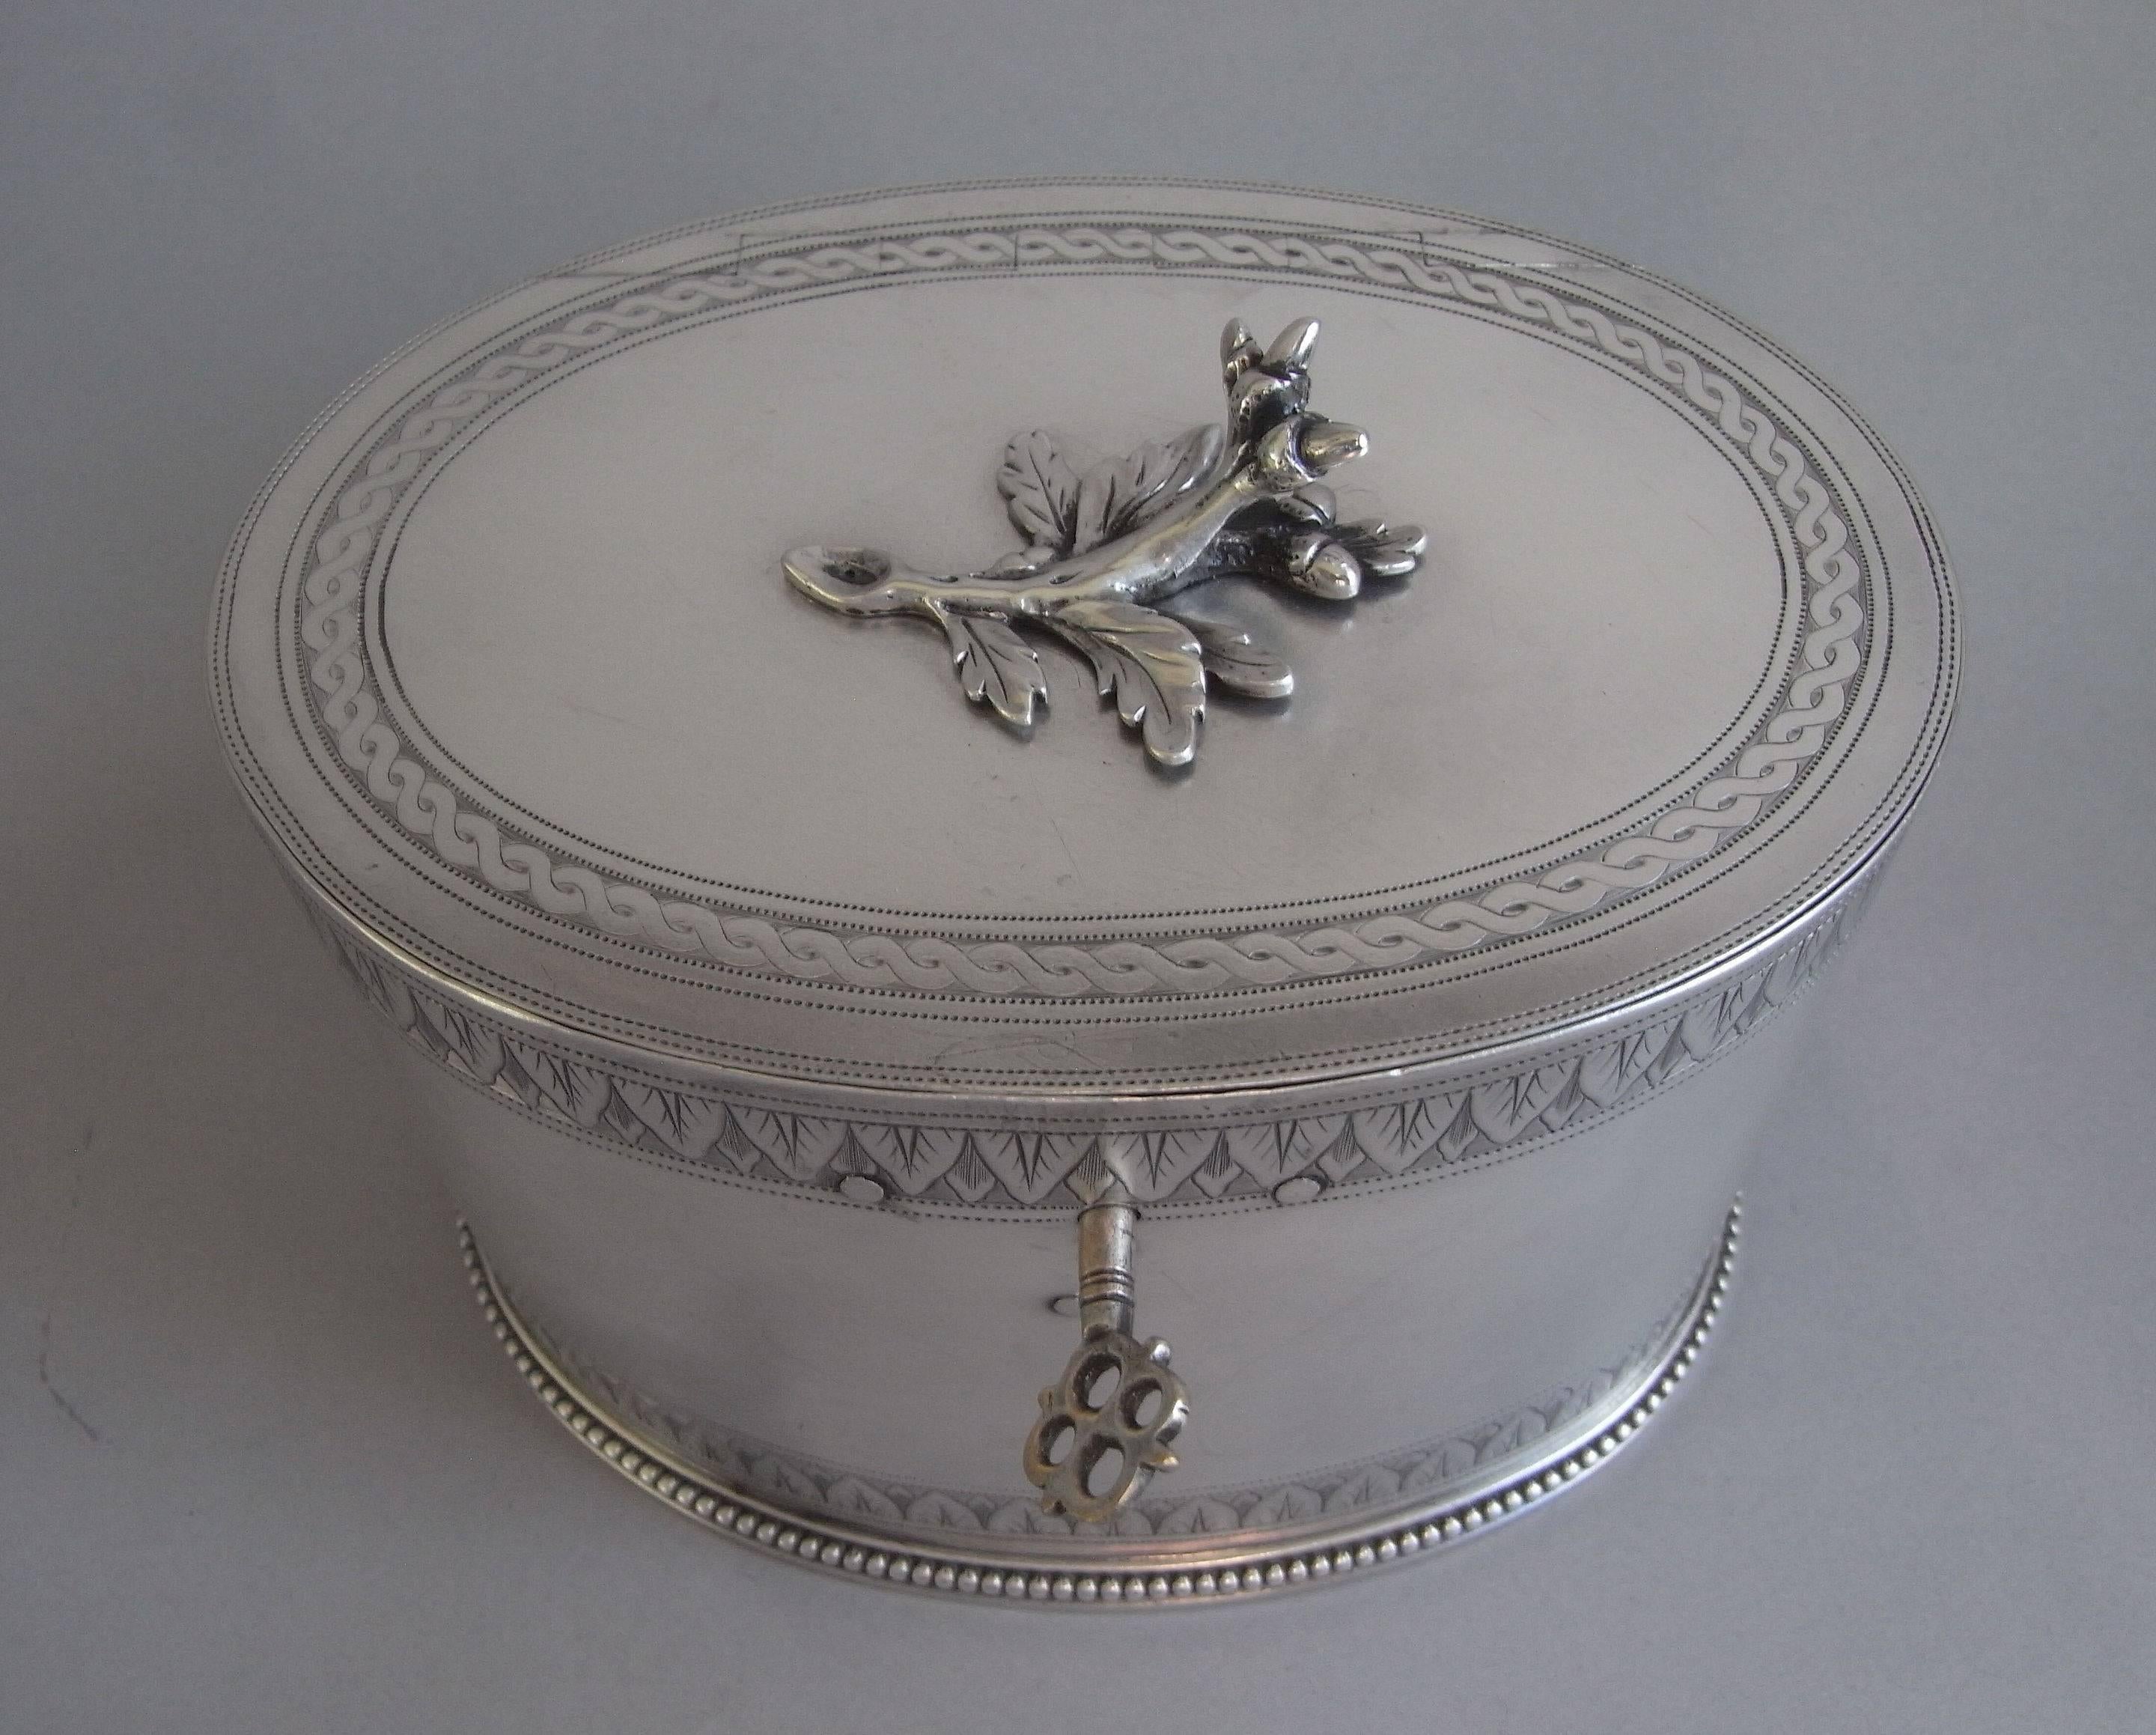 Late 18th Century Very Rare and Unusual George III Tea Caddy Made in by Hester Bateman